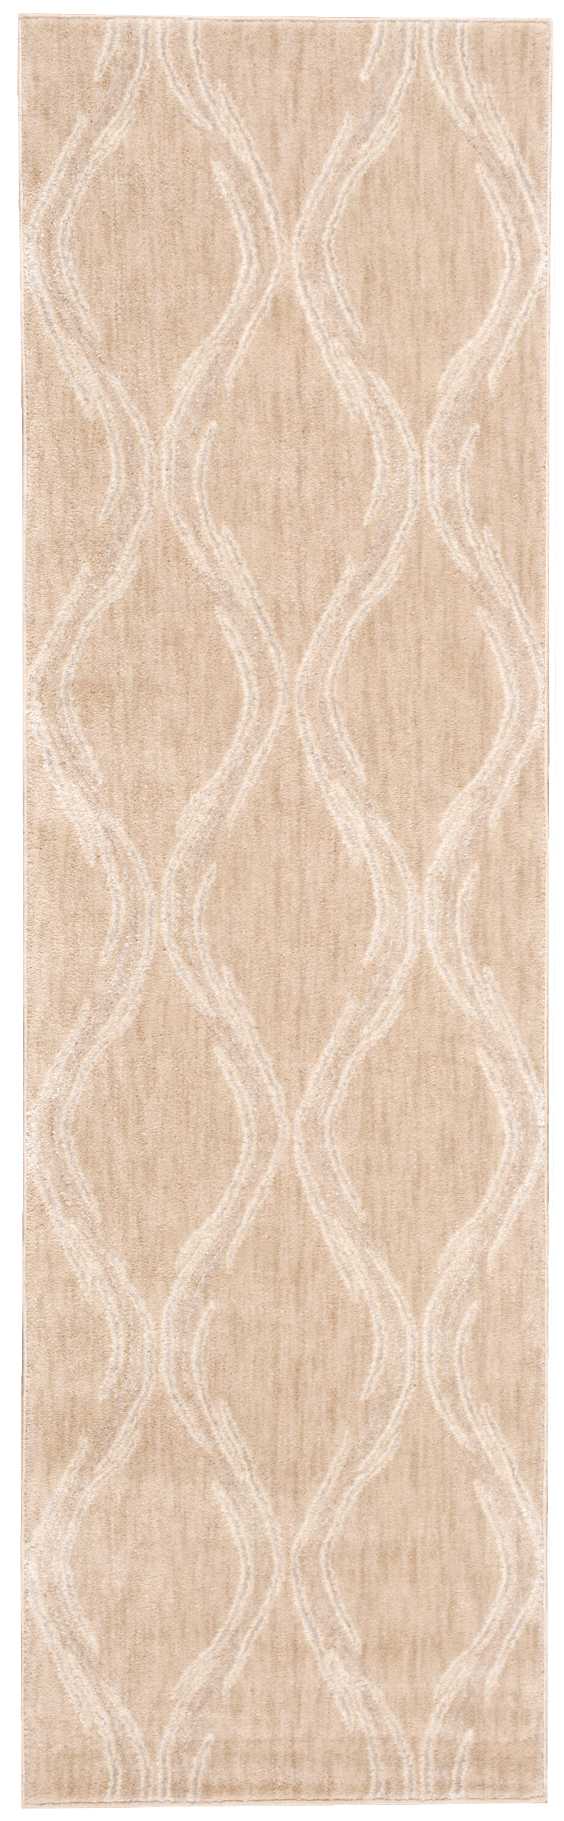 Nourison Home Tranquility TNQ02 Beige Transitional Machinemade Rug